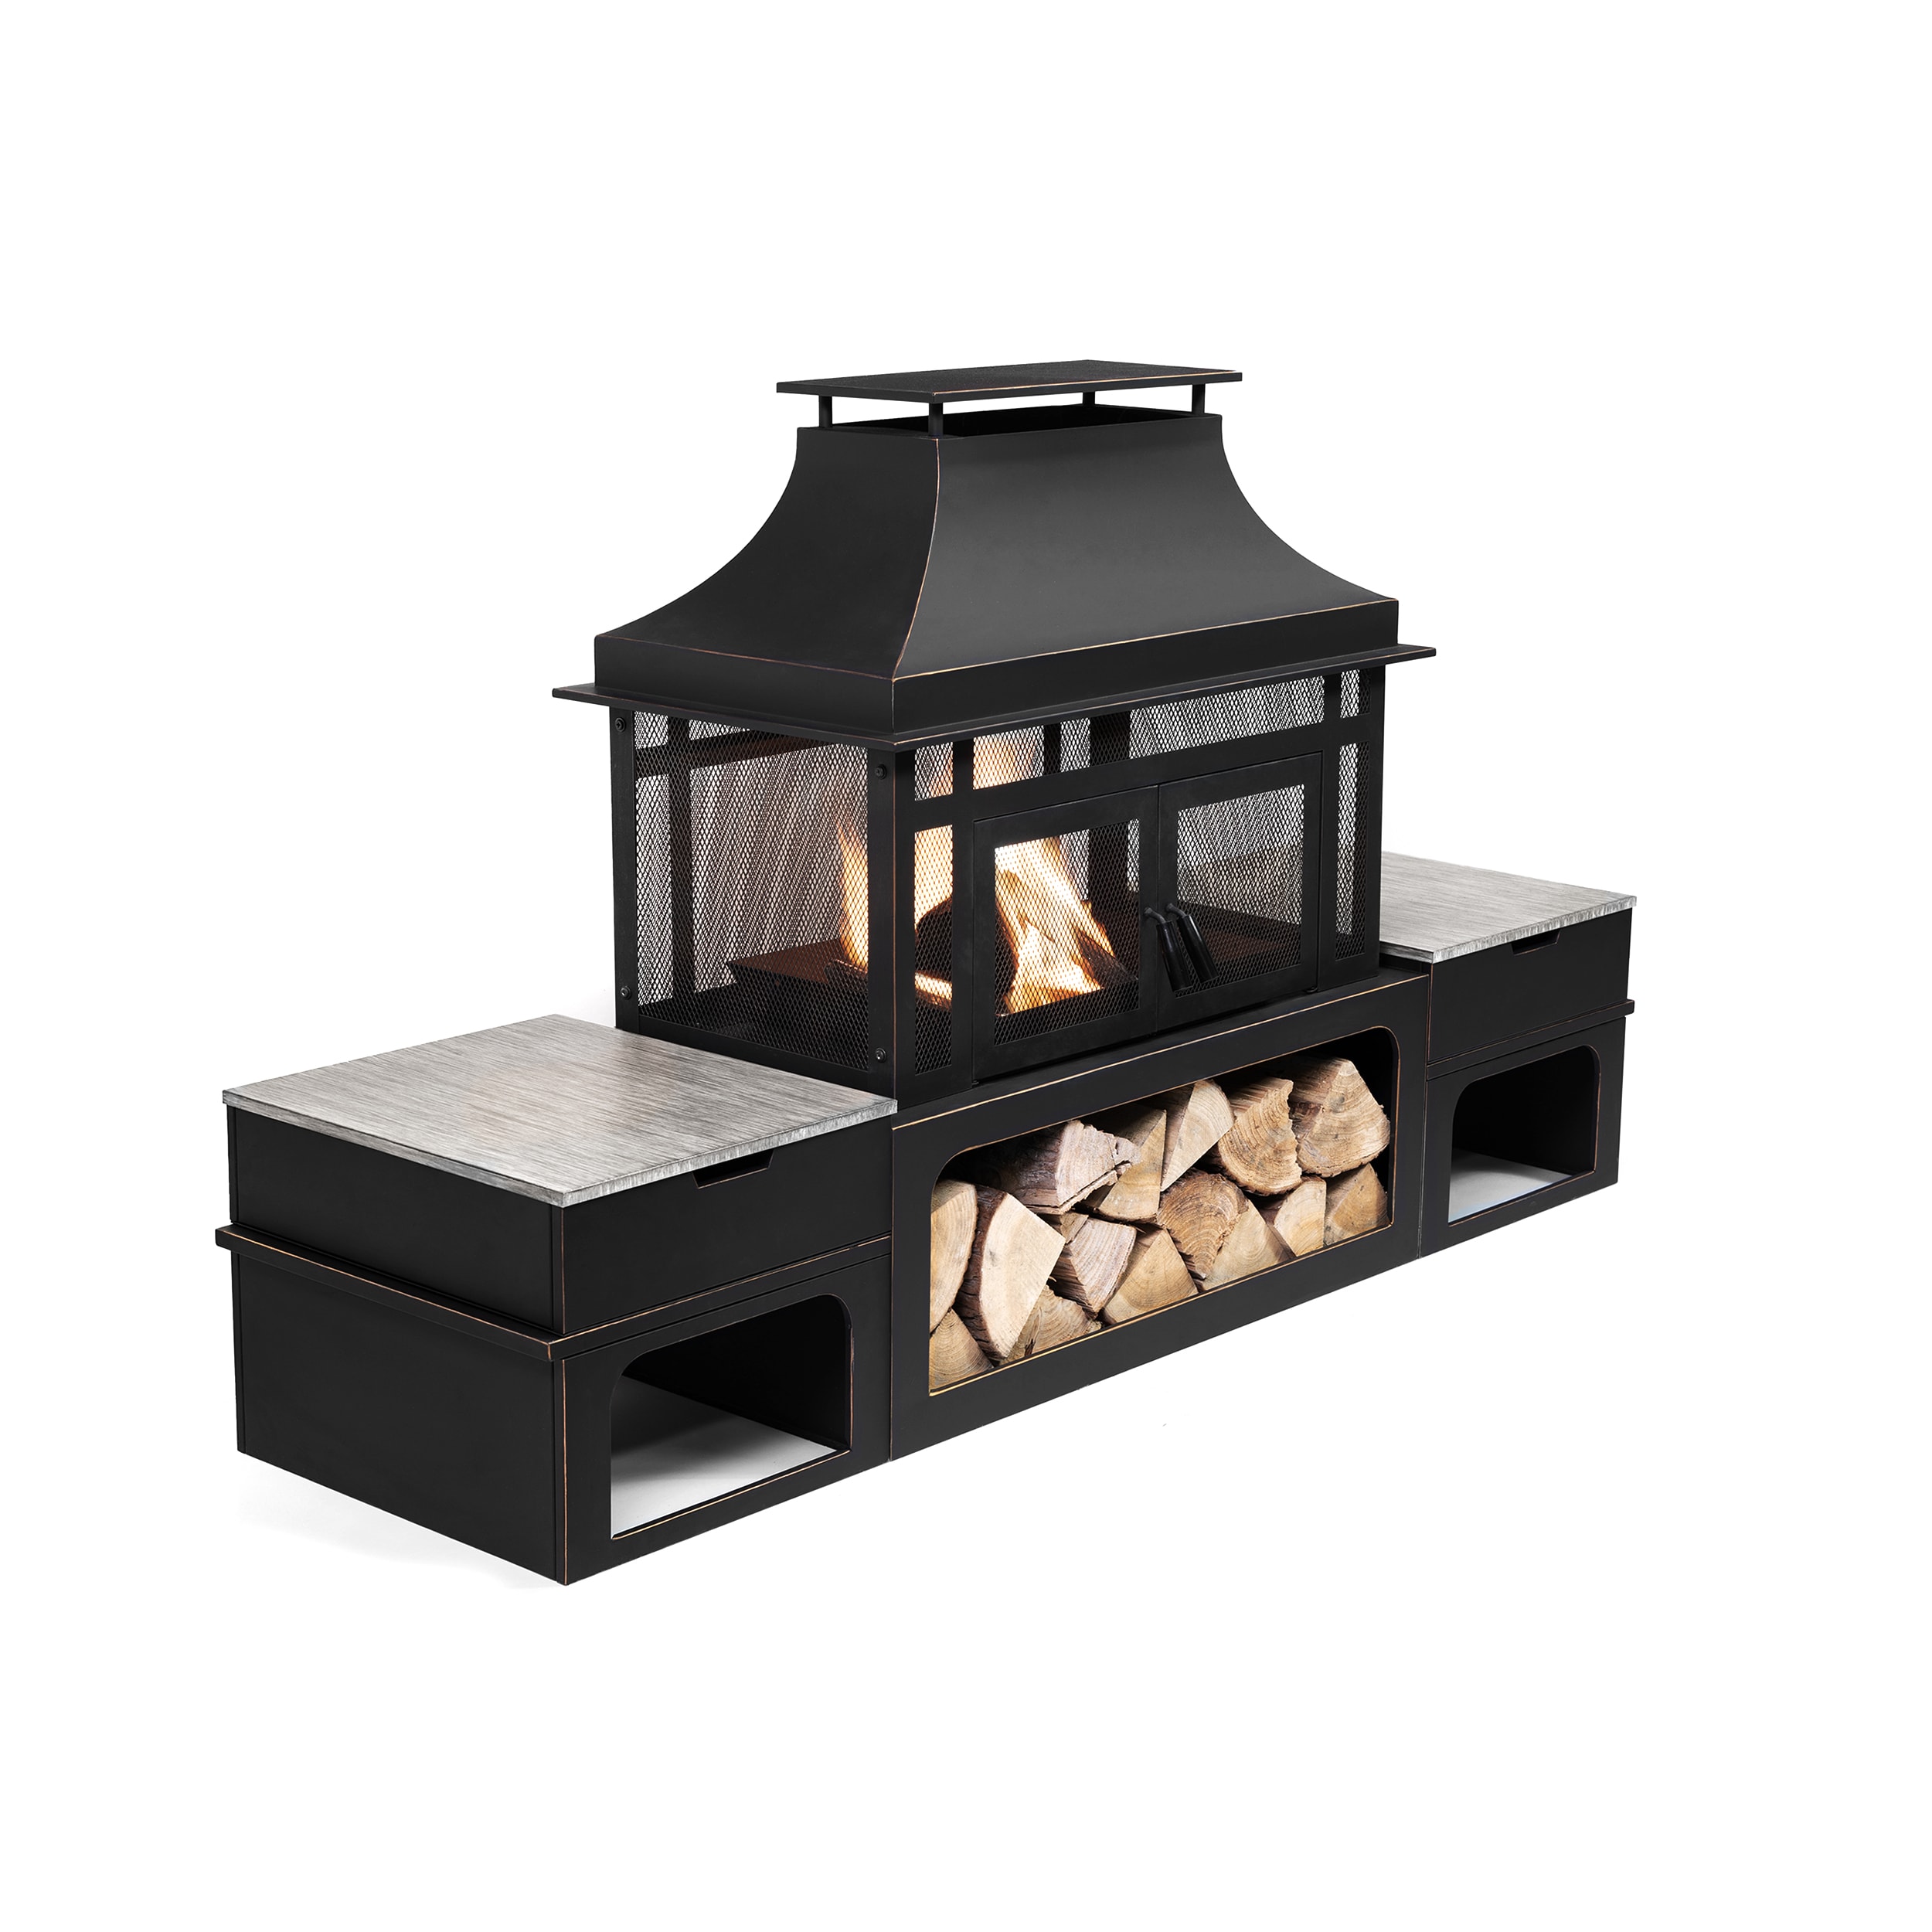 Deko Living 79.37-in Fire department Wood-Burning Rustic Black in Wood-Burning Pit Pits Steel the at W Fire